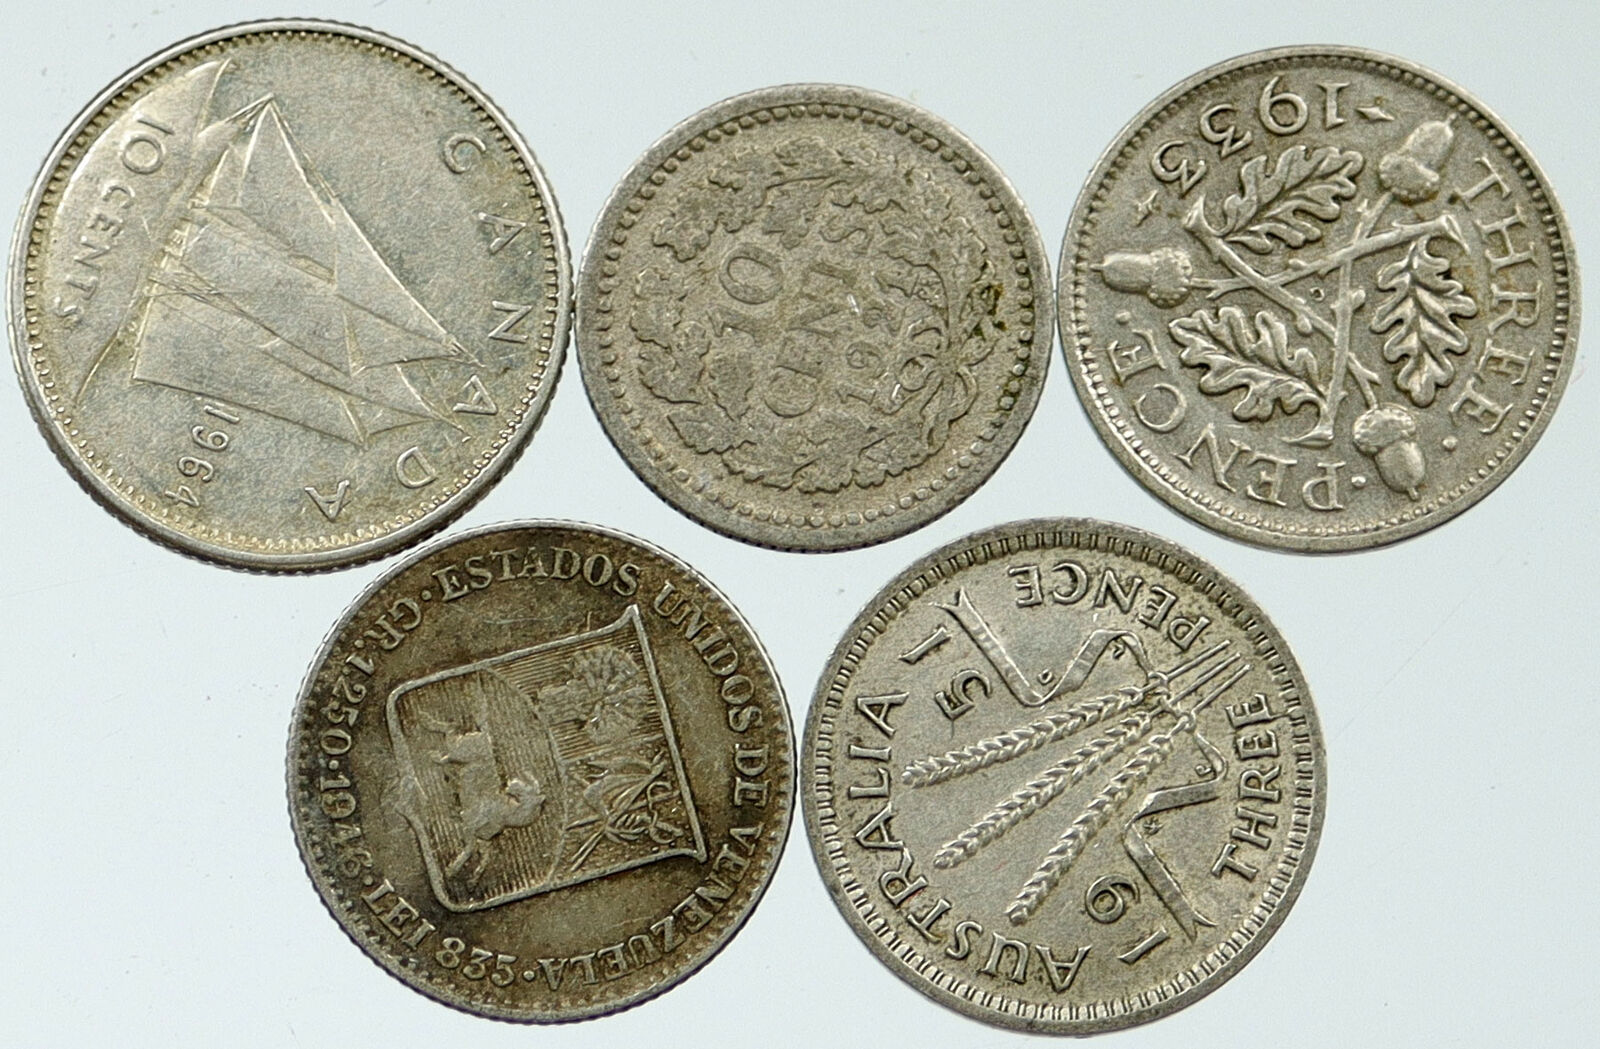 Lot of 5 Silver WORLD COINS Authentic Collection Vintage Group DEAL GIFT i115755